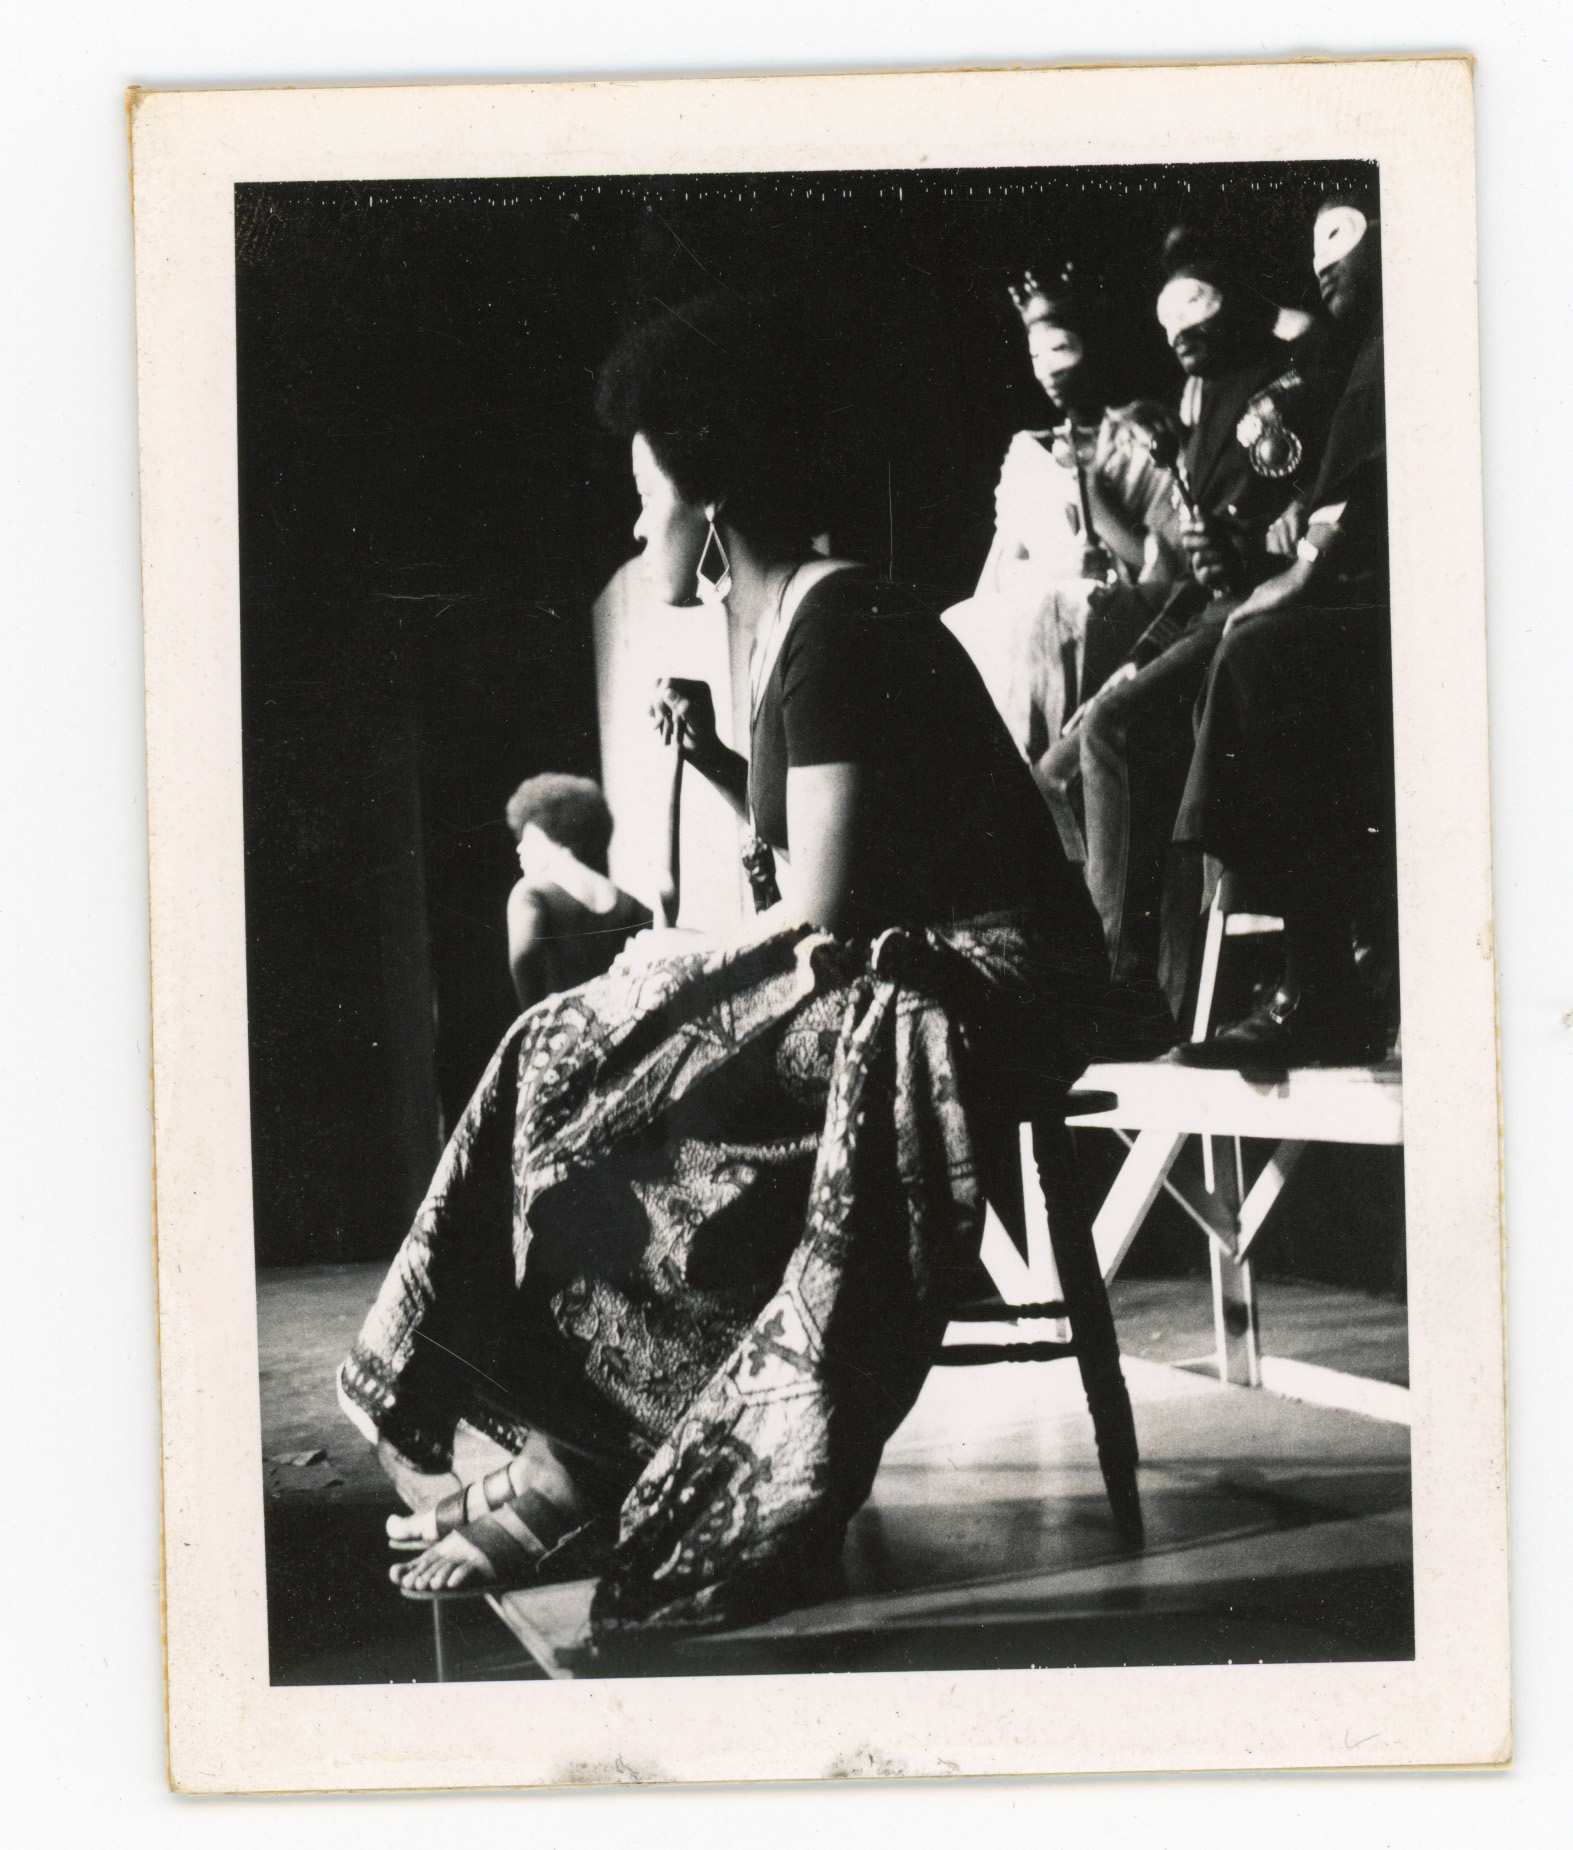 Umi in the role of Felicity in The Blacks in 1969.